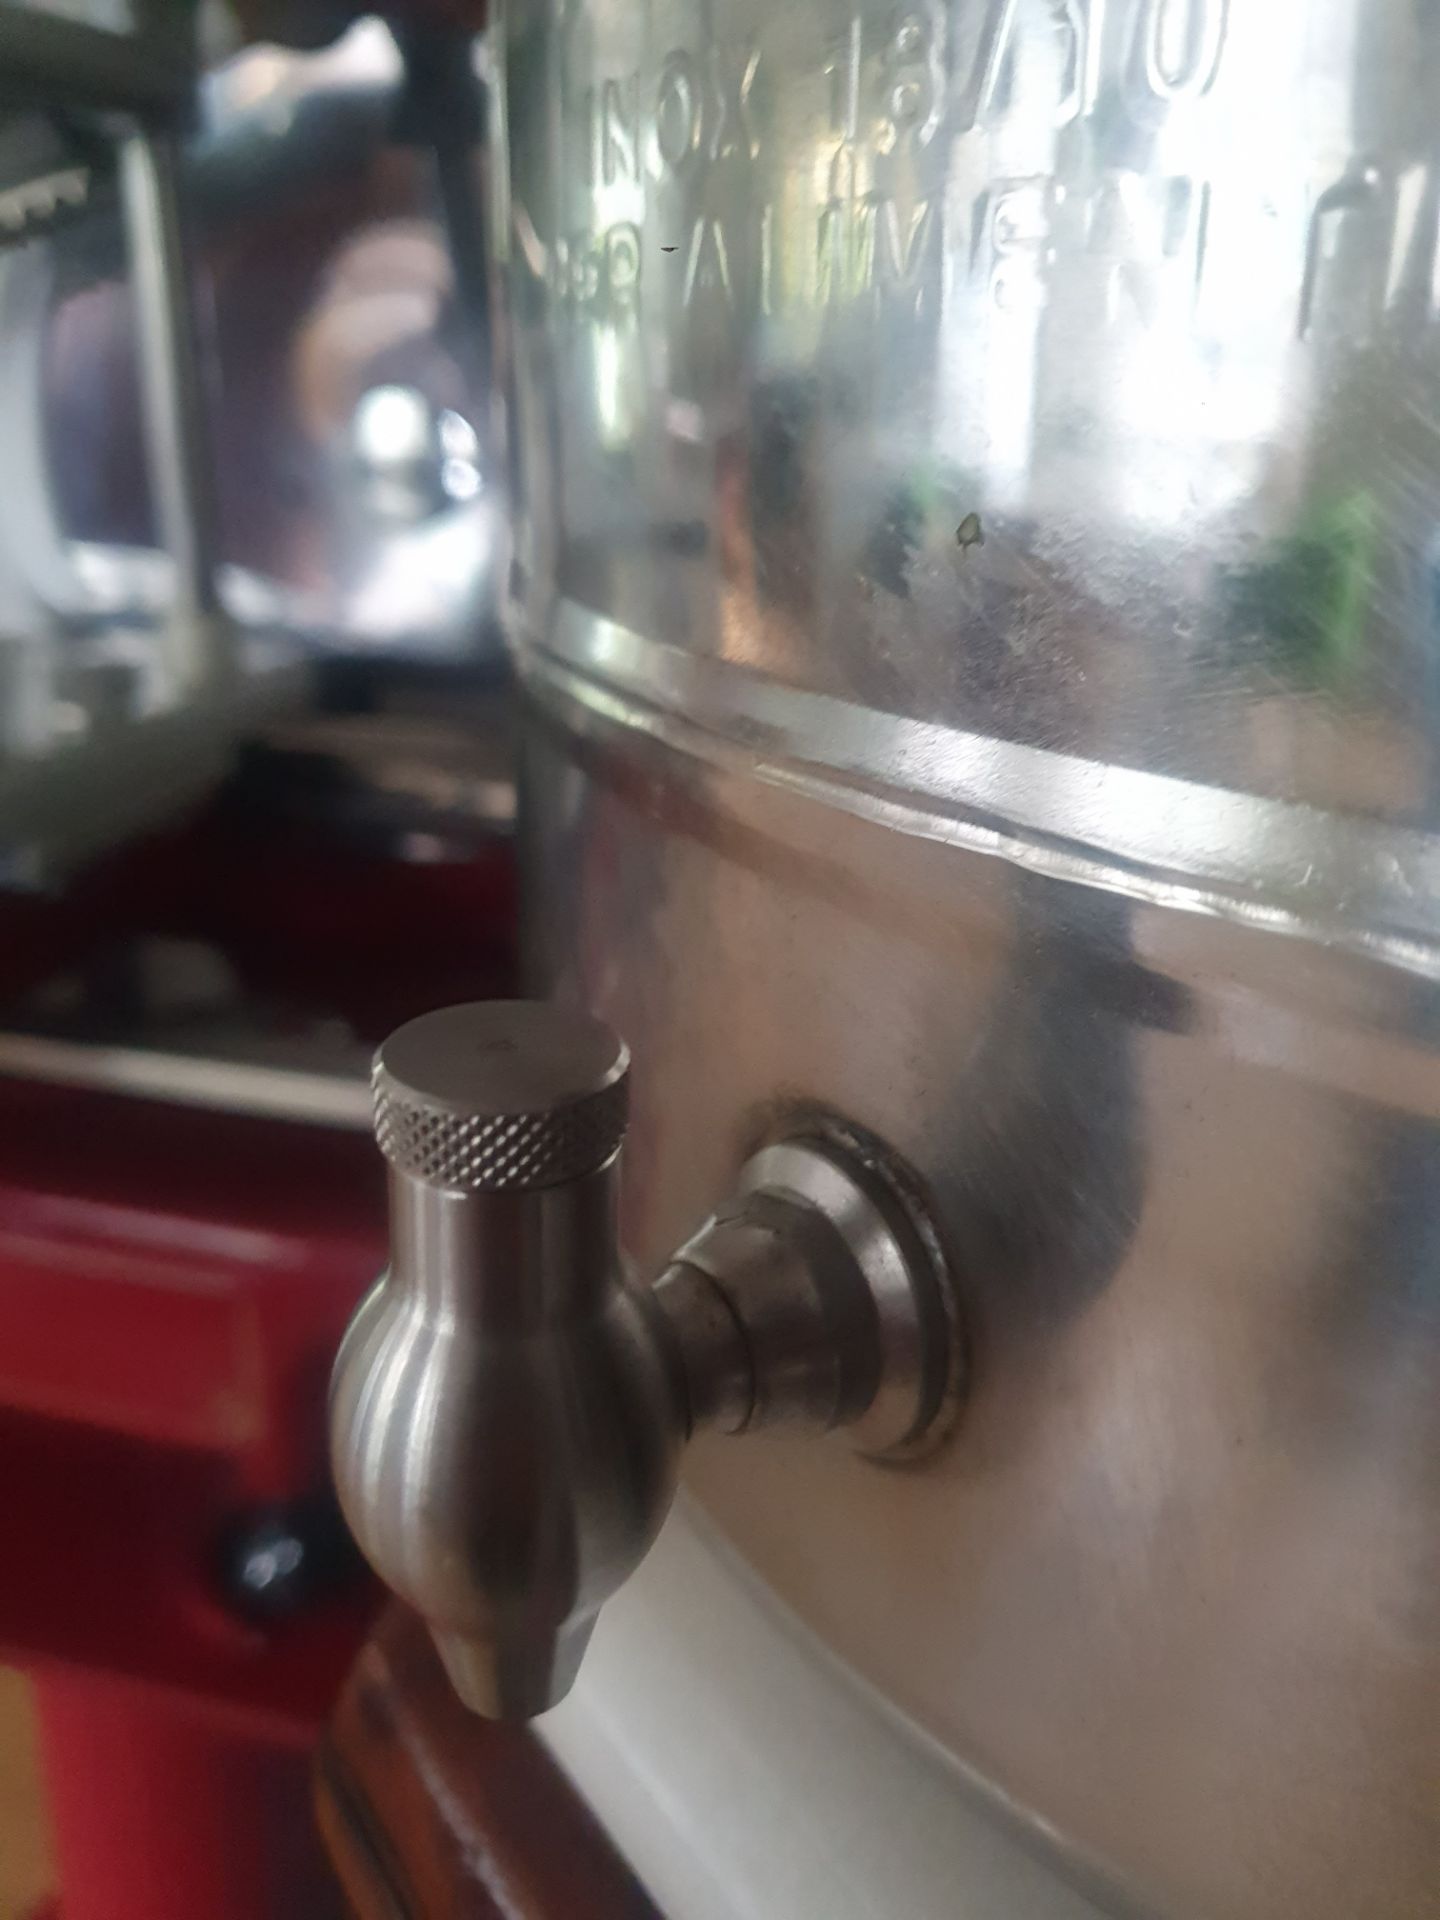 Stainless Steel Olive Oil Urn-25L - Image 4 of 8